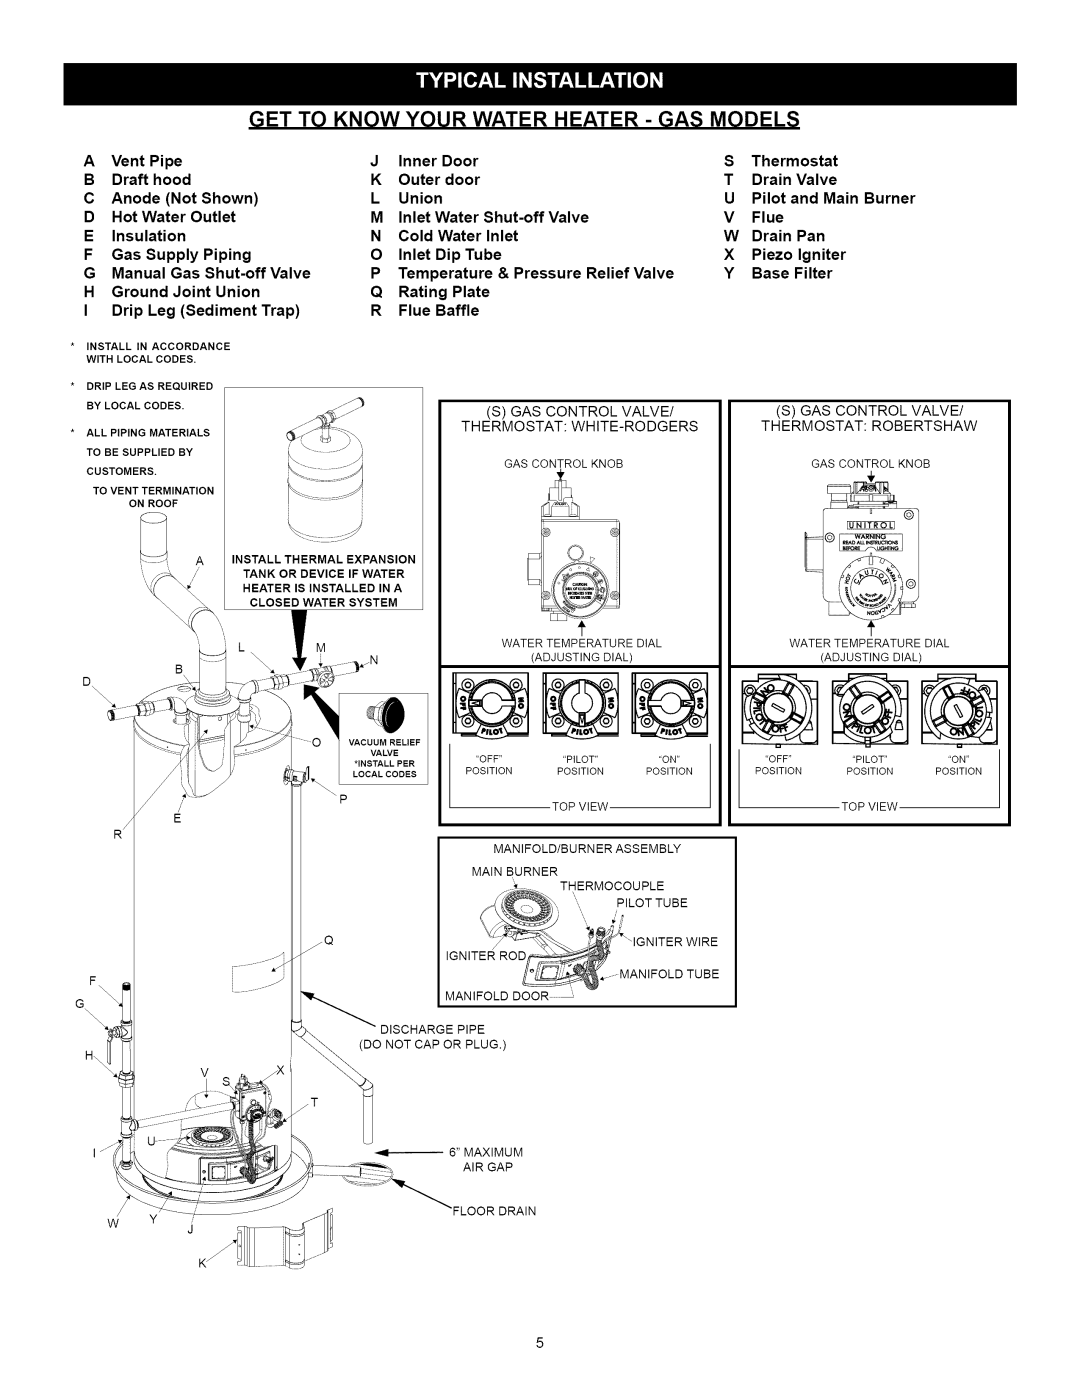 A.O. Smith installation instructions Get To Know Your Water Heater - Gas Models 